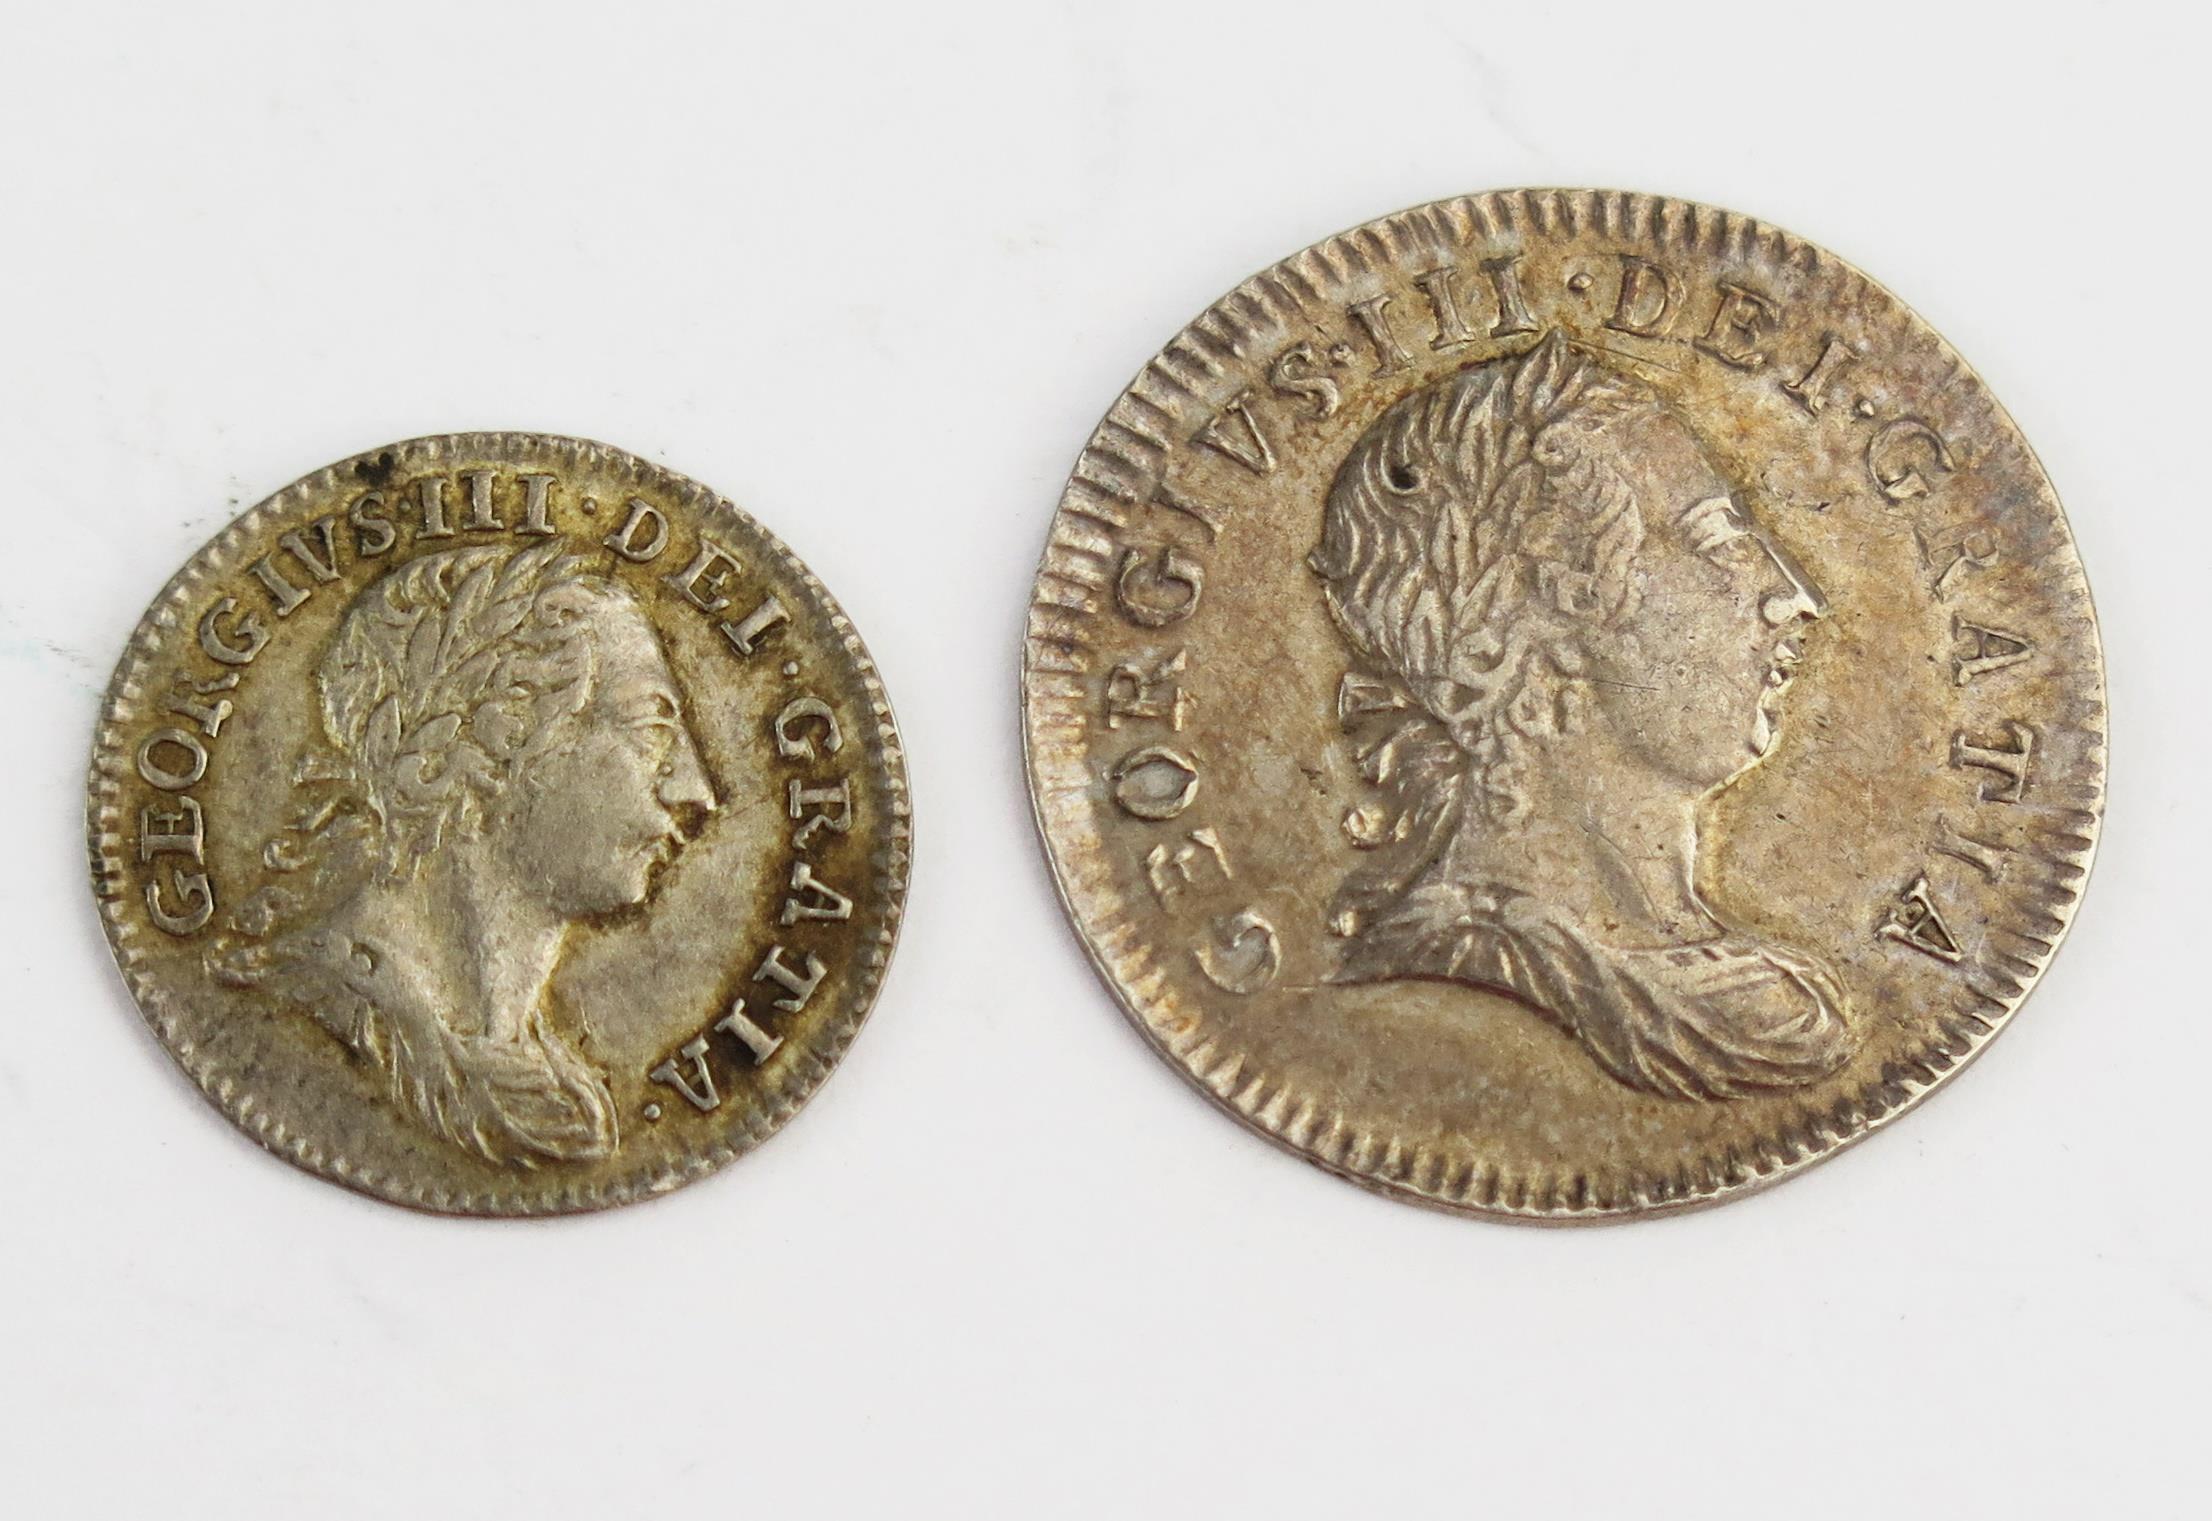 George III 1766 twopence and 1776 fourpence. - Image 3 of 3